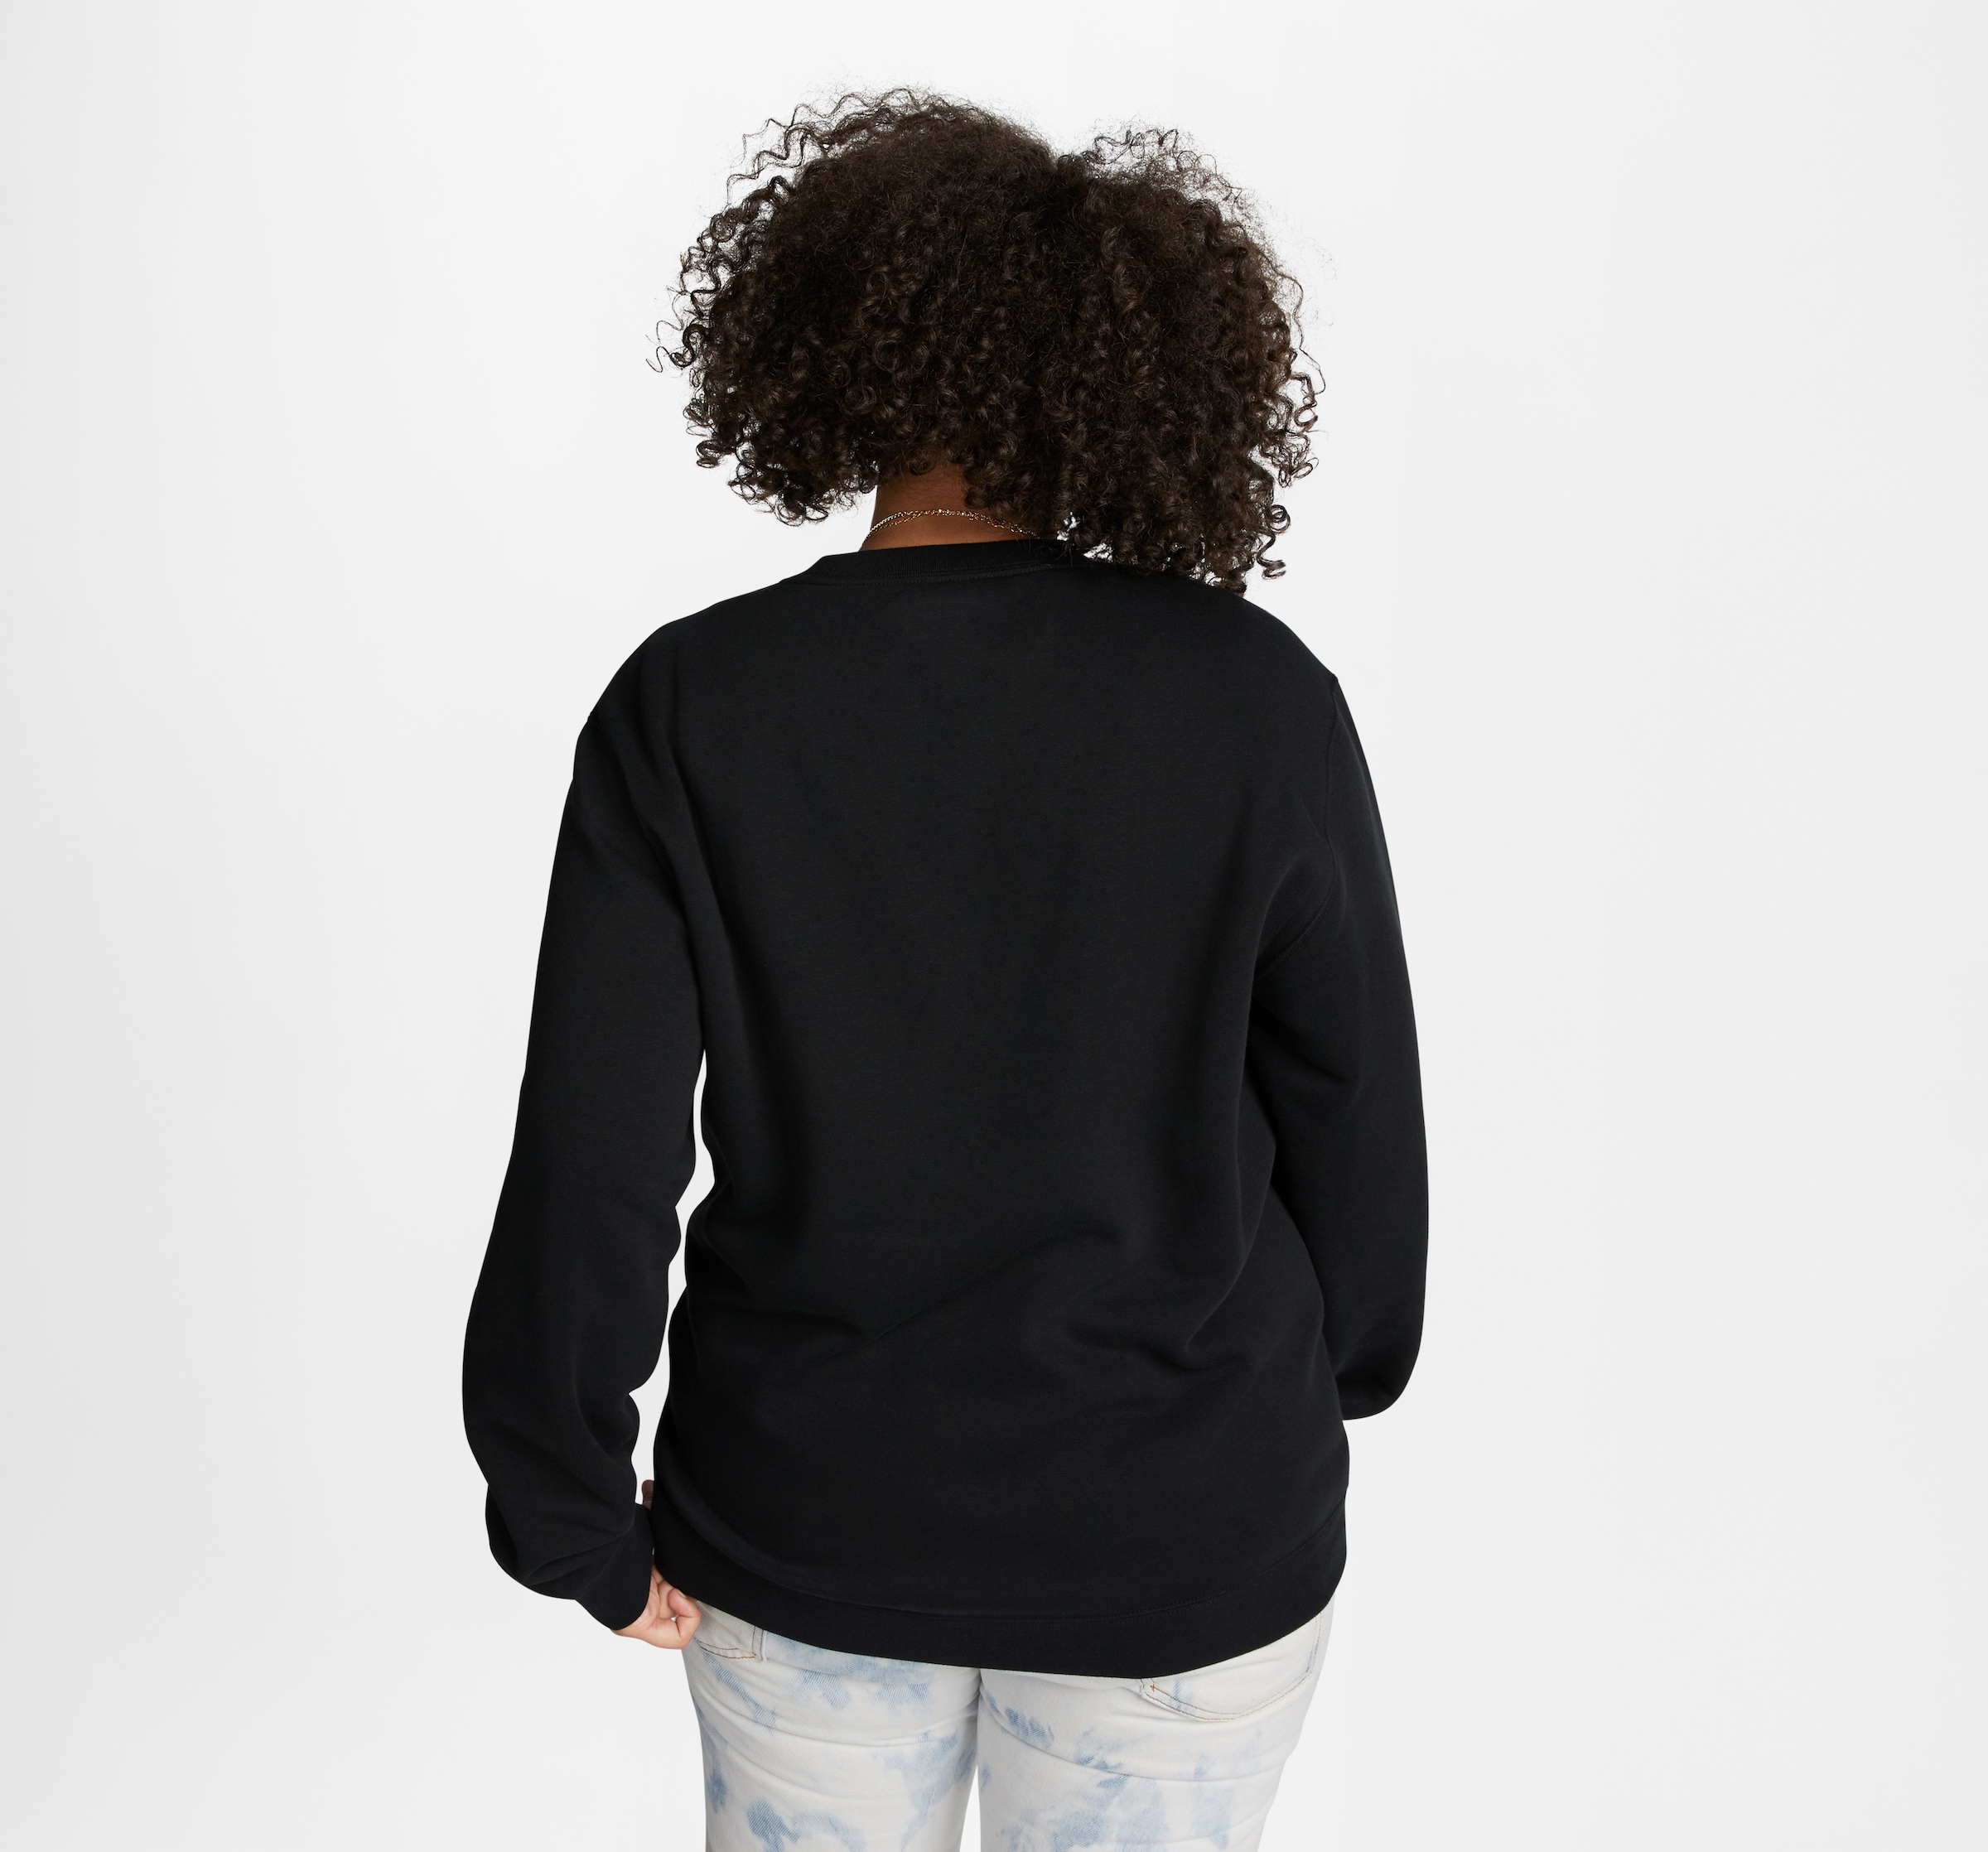 bei BACK« BRUSHED Converse ALL »UNISEX PATCH Sweatshirt STAR